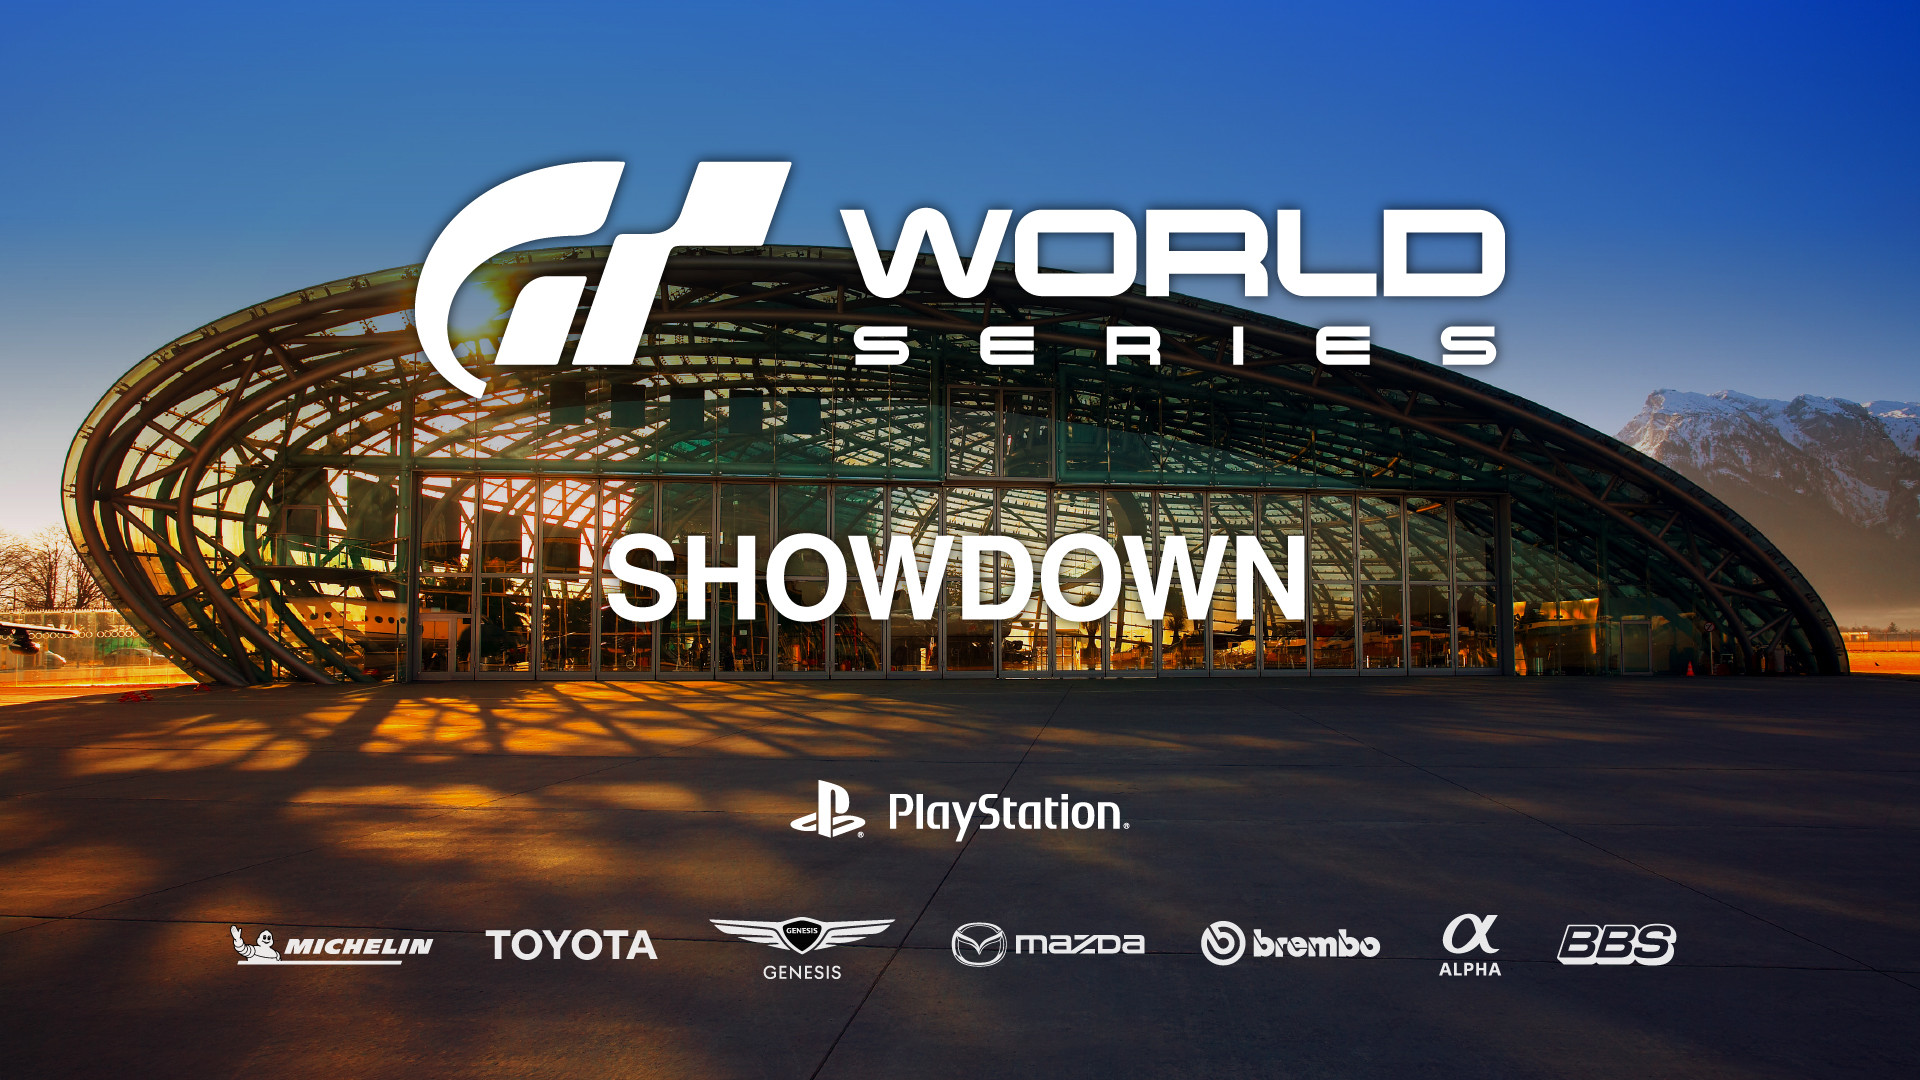 Gran Turismo World Series Showdown 2022 to be Held on July 30 31